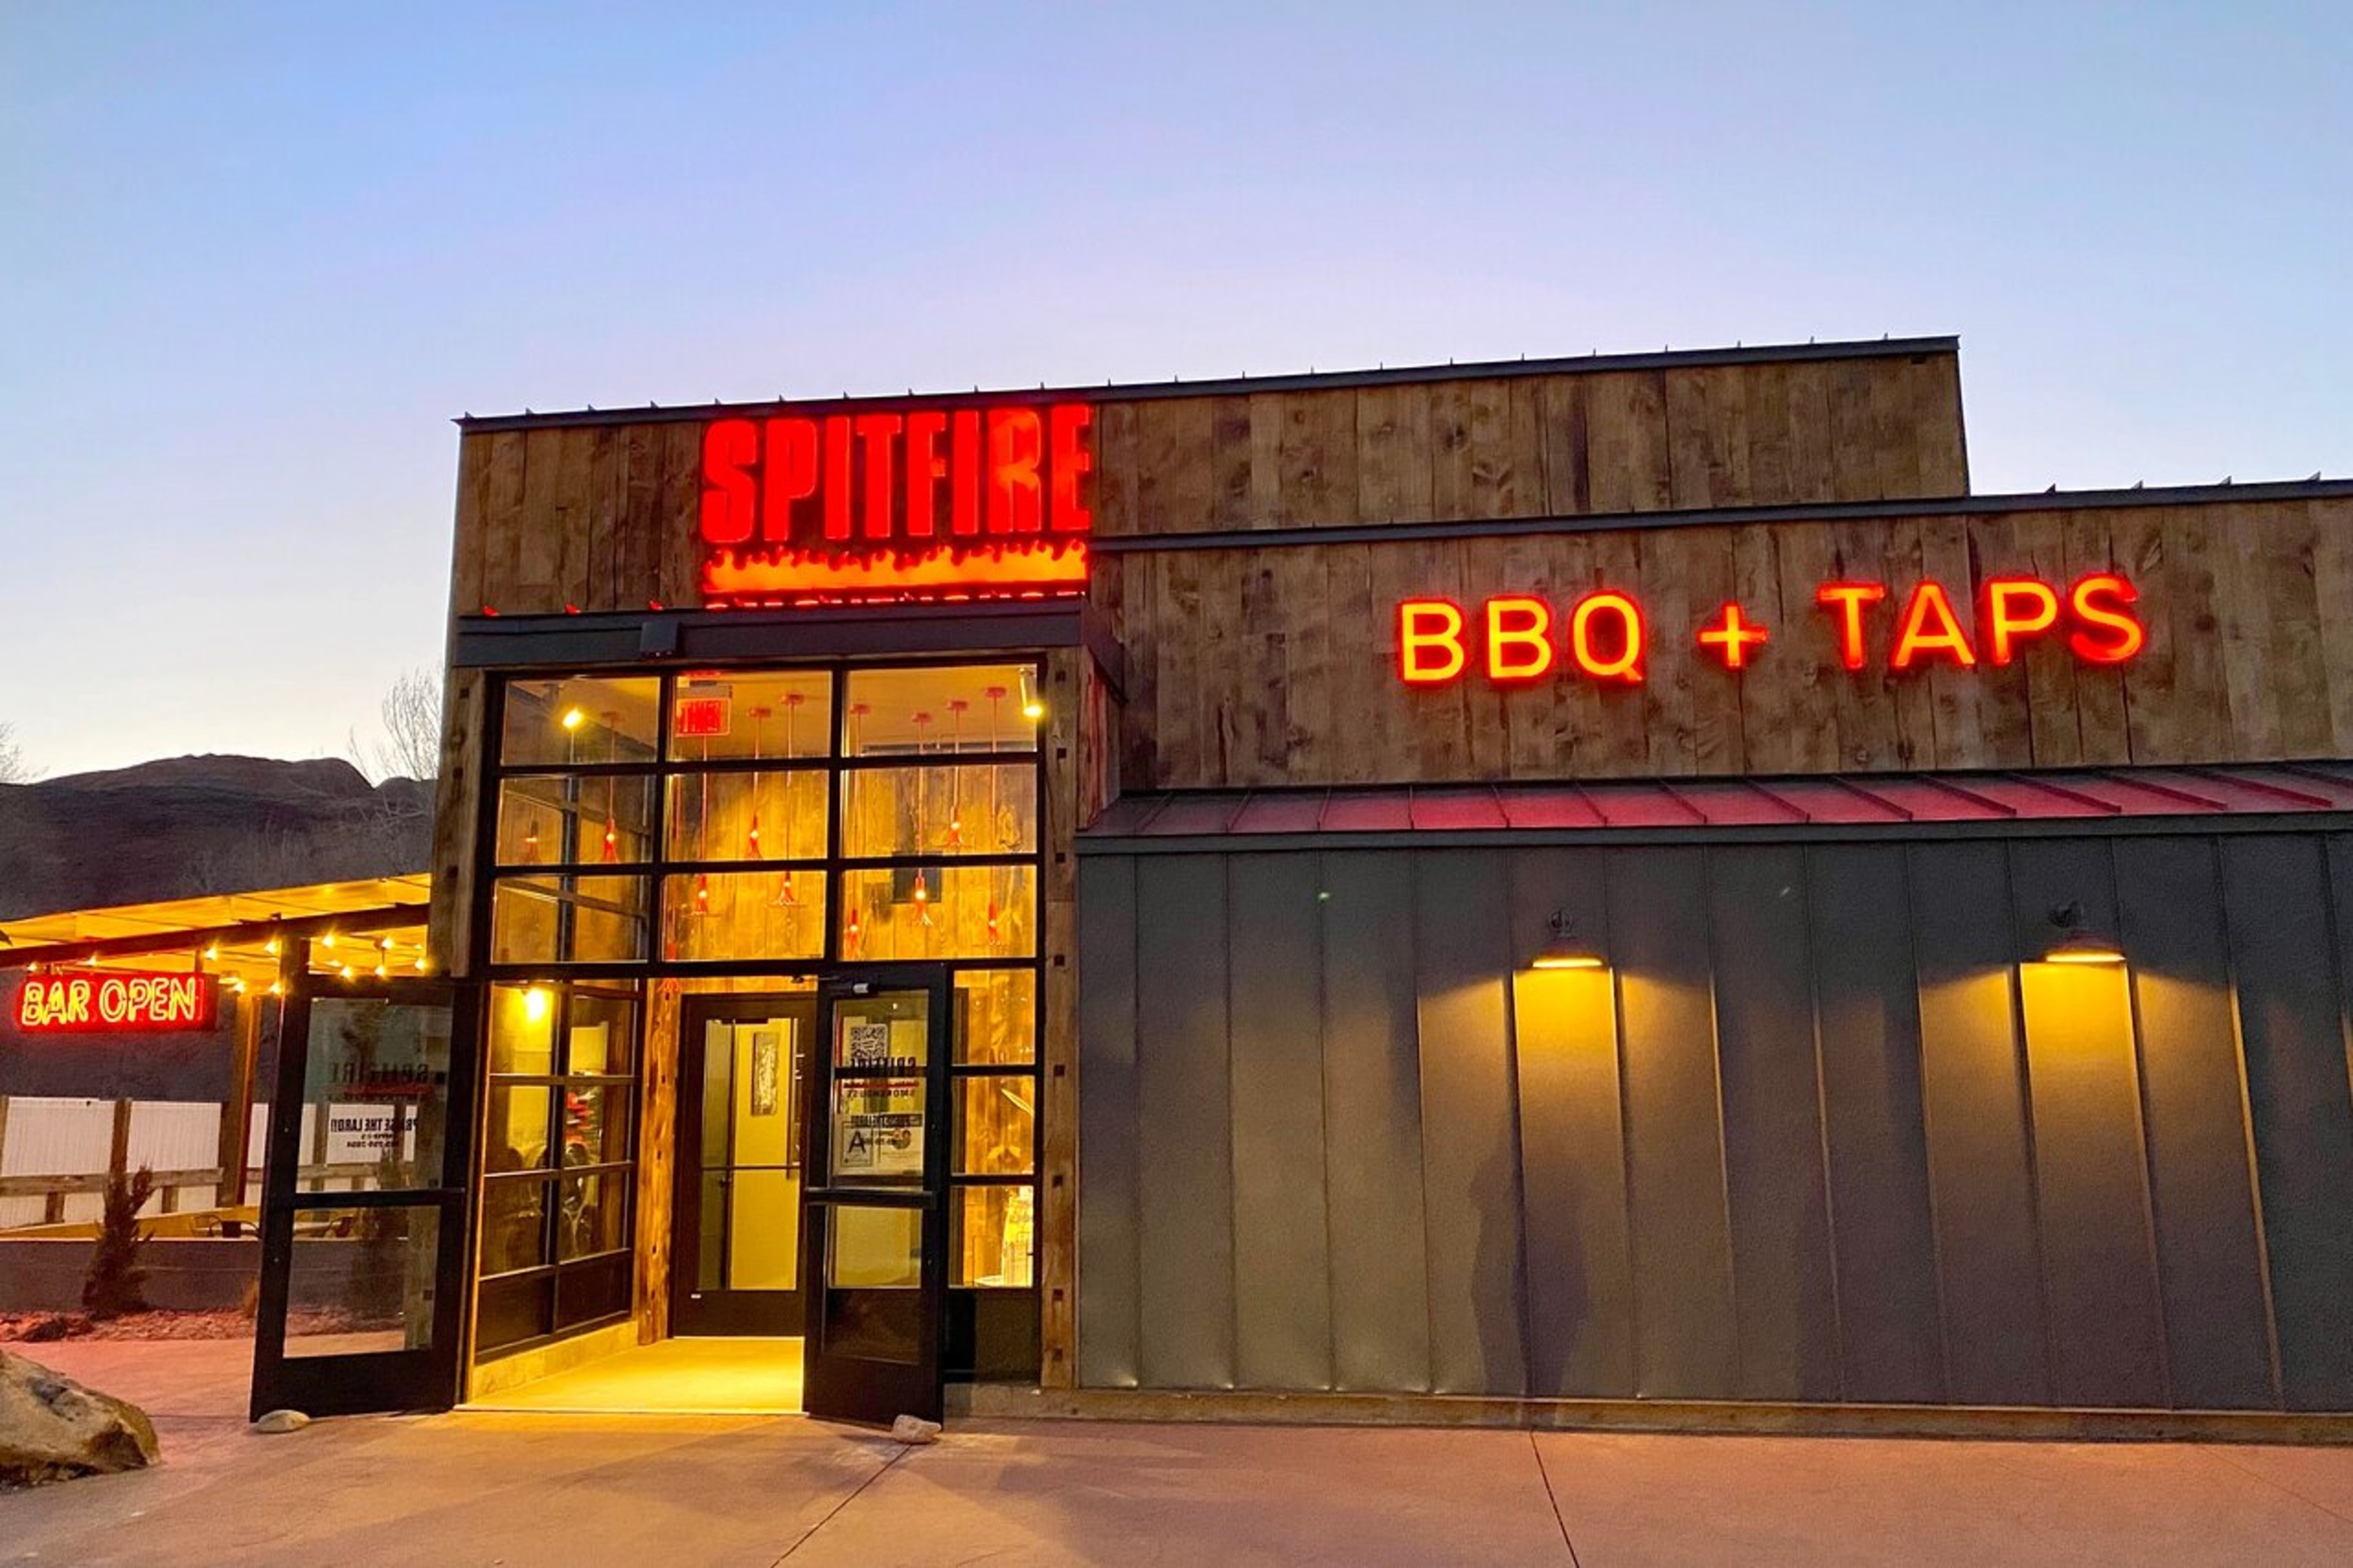 <p>Enjoy a meal at a barbecue right in the heart of town. Open seven days a week, this restaurant is about getting a taste of the Old West. At $20 a plate, it's a good deal for families after a long day's journey.  </p><p>You may also like: <a href='https://www.yardbarker.com/lifestyle/articles/dont_forget_these_20_snacks_for_your_next_outdoor_adventure_122823/s1__35432132'>Don't forget these 20 snacks for your next outdoor adventure</a></p>